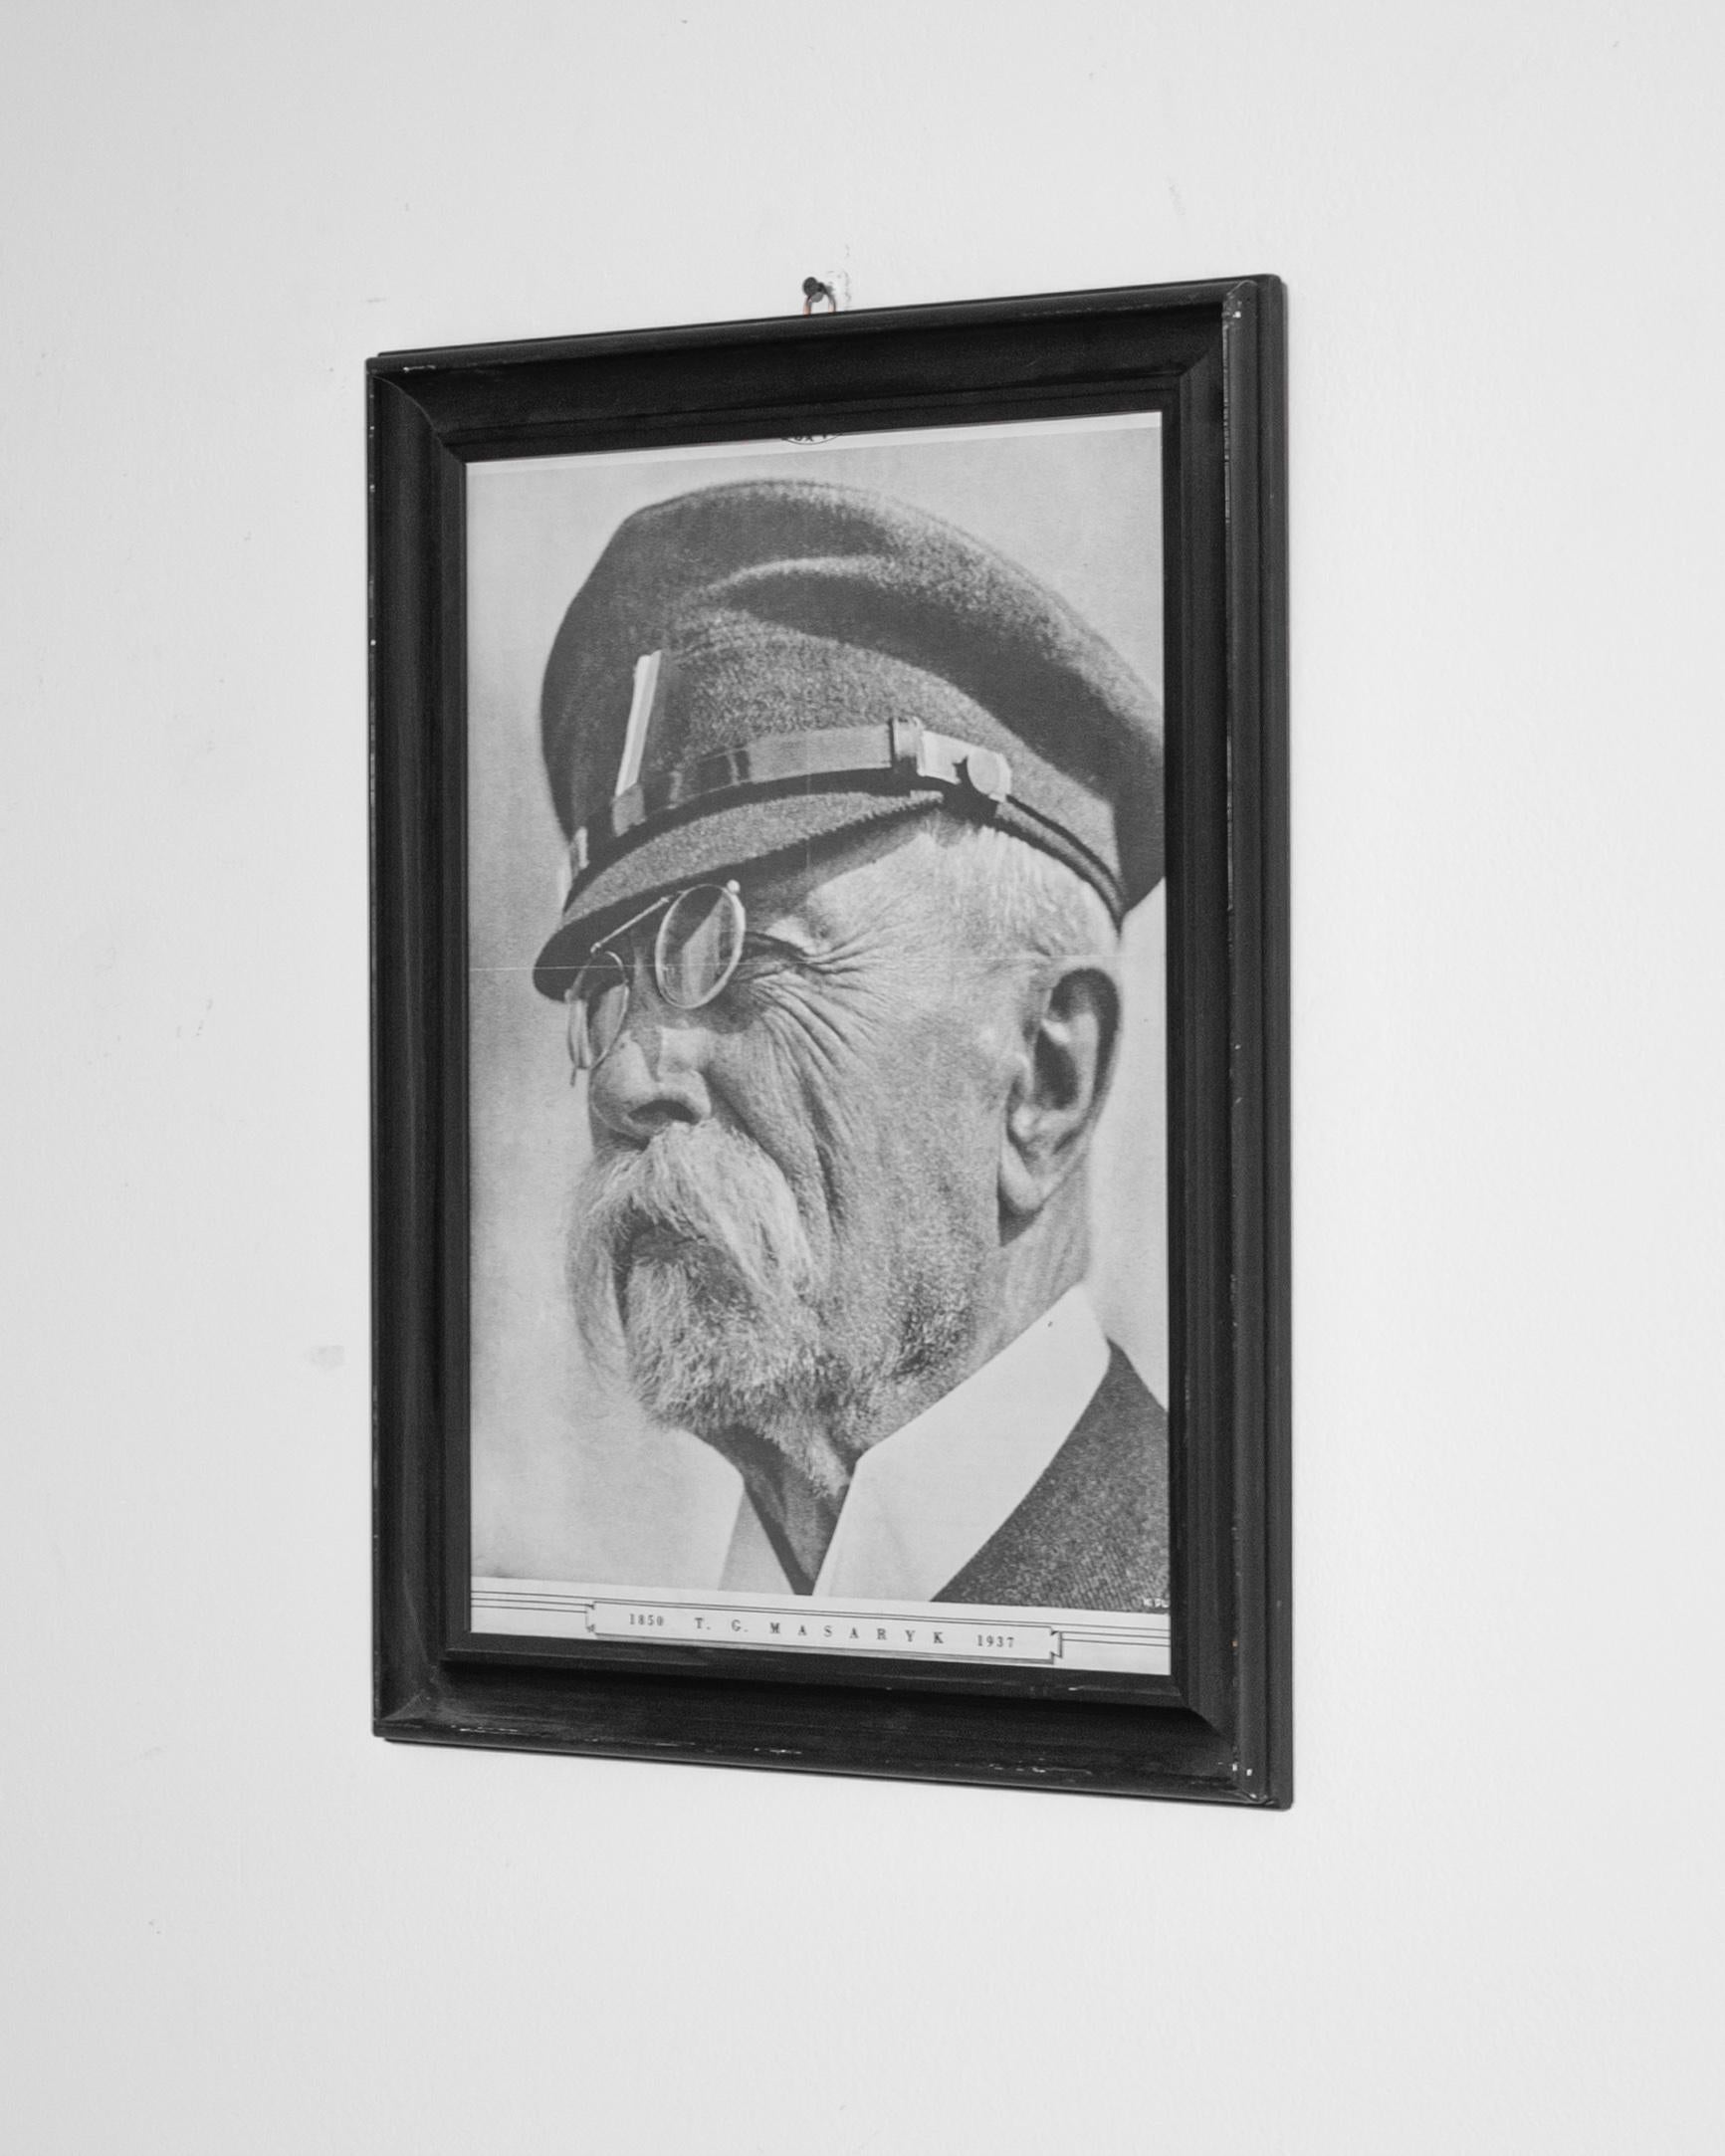 This piece is a poignant representation of Czech history, encapsulating the reverence for T. G. Masaryk, a pivotal figure in Czechoslovakia's independence. The artwork, dating back to the 20th century, presents a monochrome portrait with profound